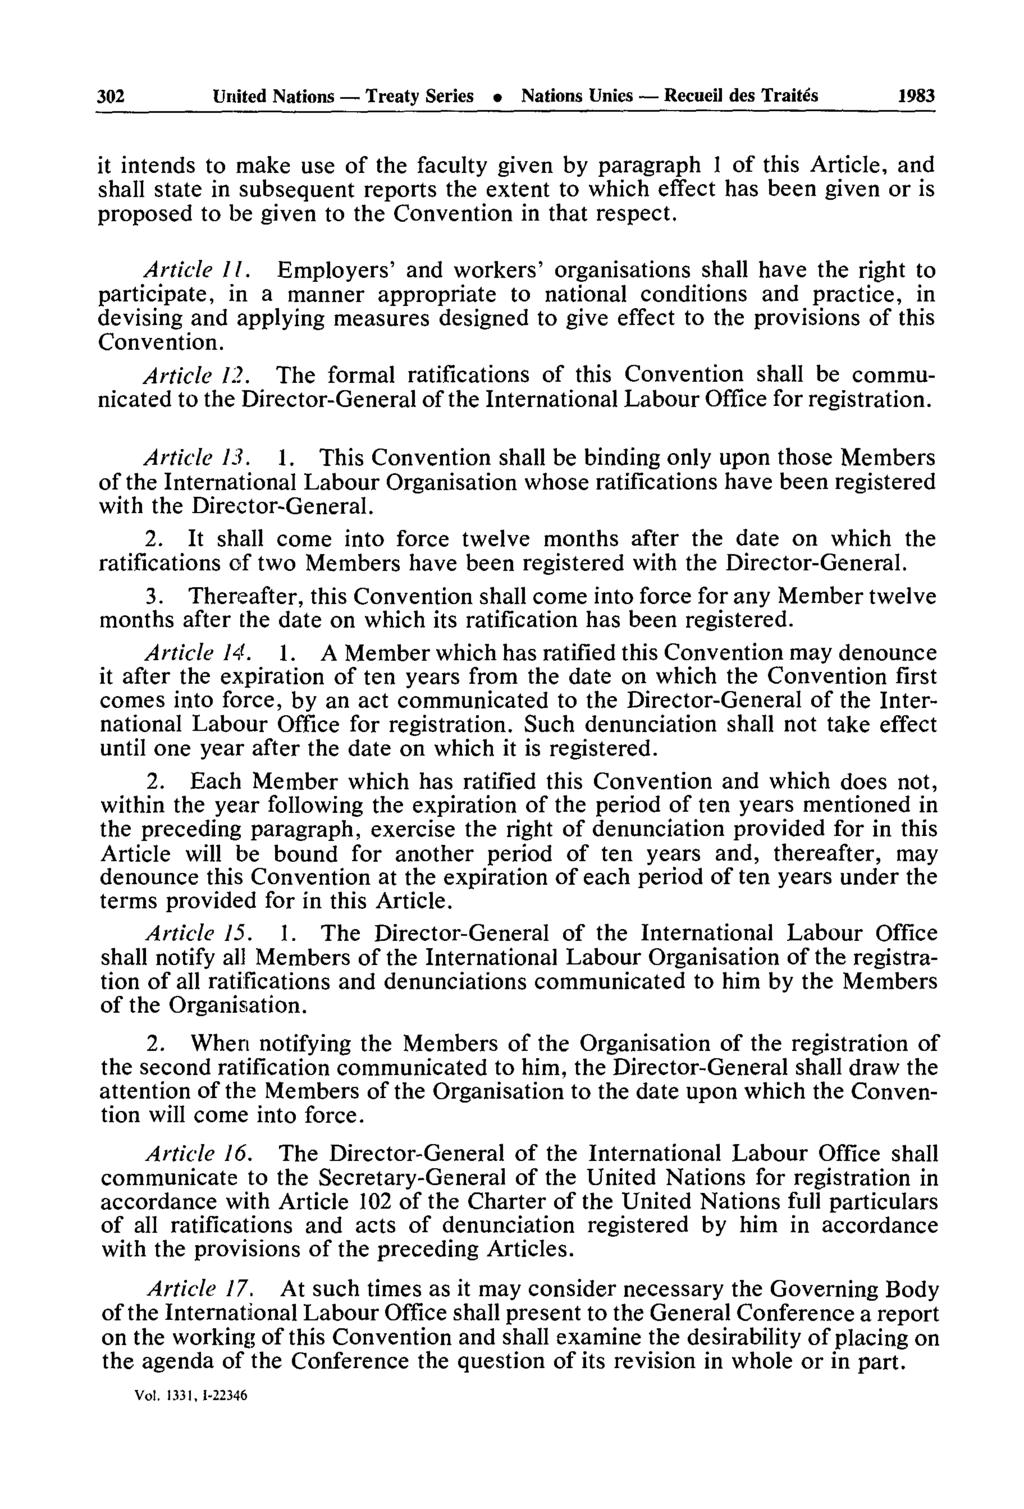 302 United Nations Treaty Series Nations Unies Recueil des Traités 1983 it intends to make use of the faculty given by paragraph 1 of this Article, and shall state in subsequent reports the extent to